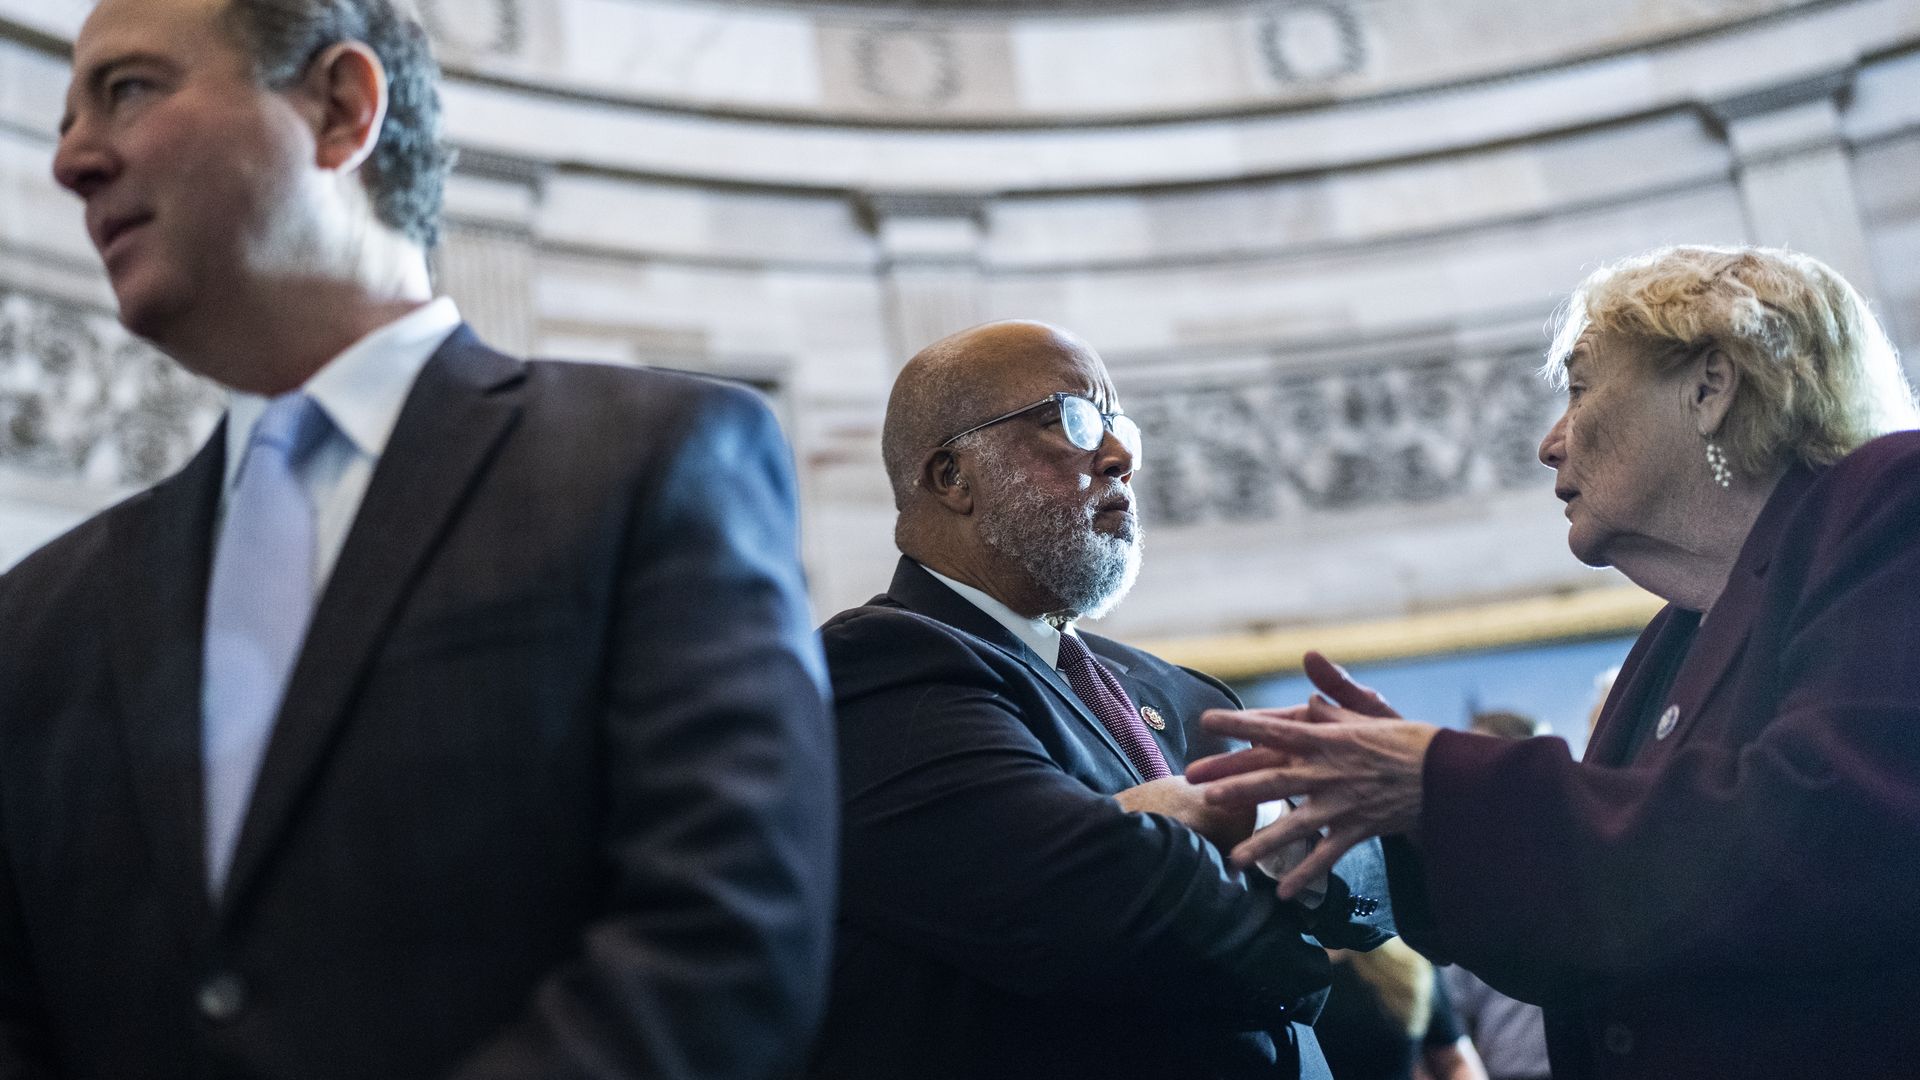 Jan. 6 Committee members Bennie Thompson and Zoe Lofgren speak at the Capitol rotunda during an event honoring law enforcement who responded to Jan. 6.